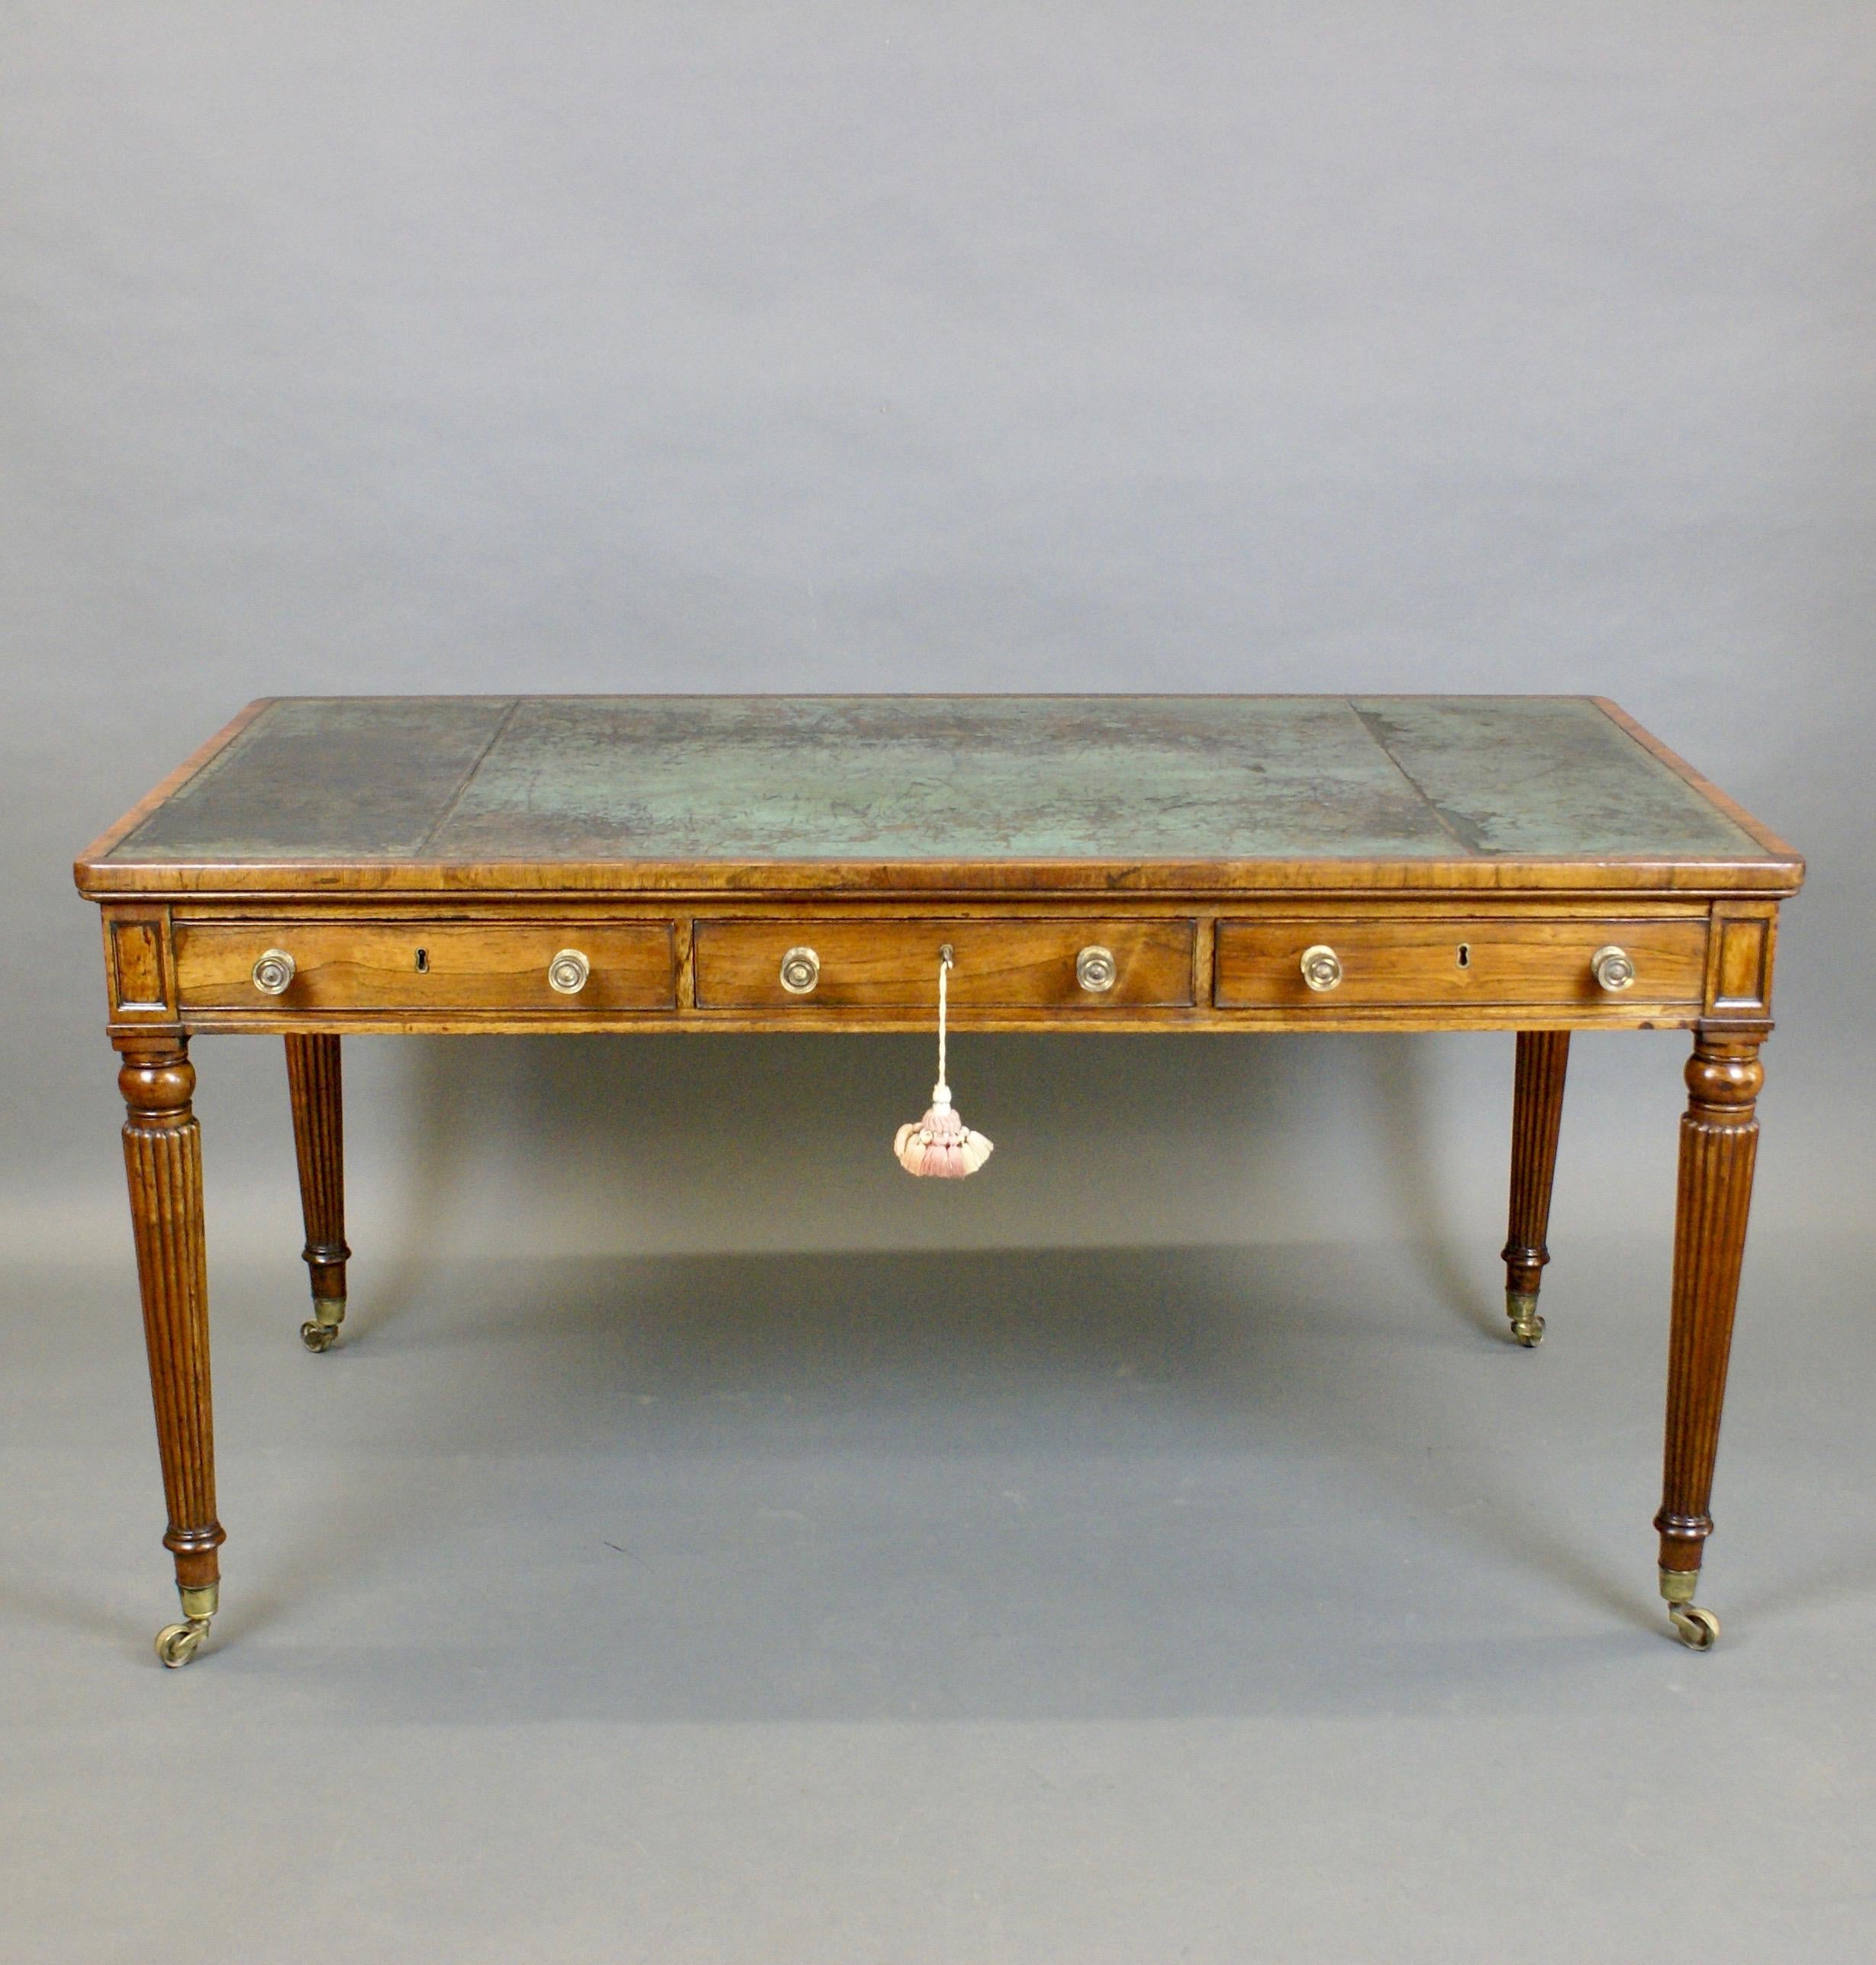 A fine late George III period rosewood writing/ library table by Solomon & Brown, Castle St. Long Acre London . The cross- banded edge enclosing a distressed marble blue hide inset, which appears to be the original.
Comprising three drawers and